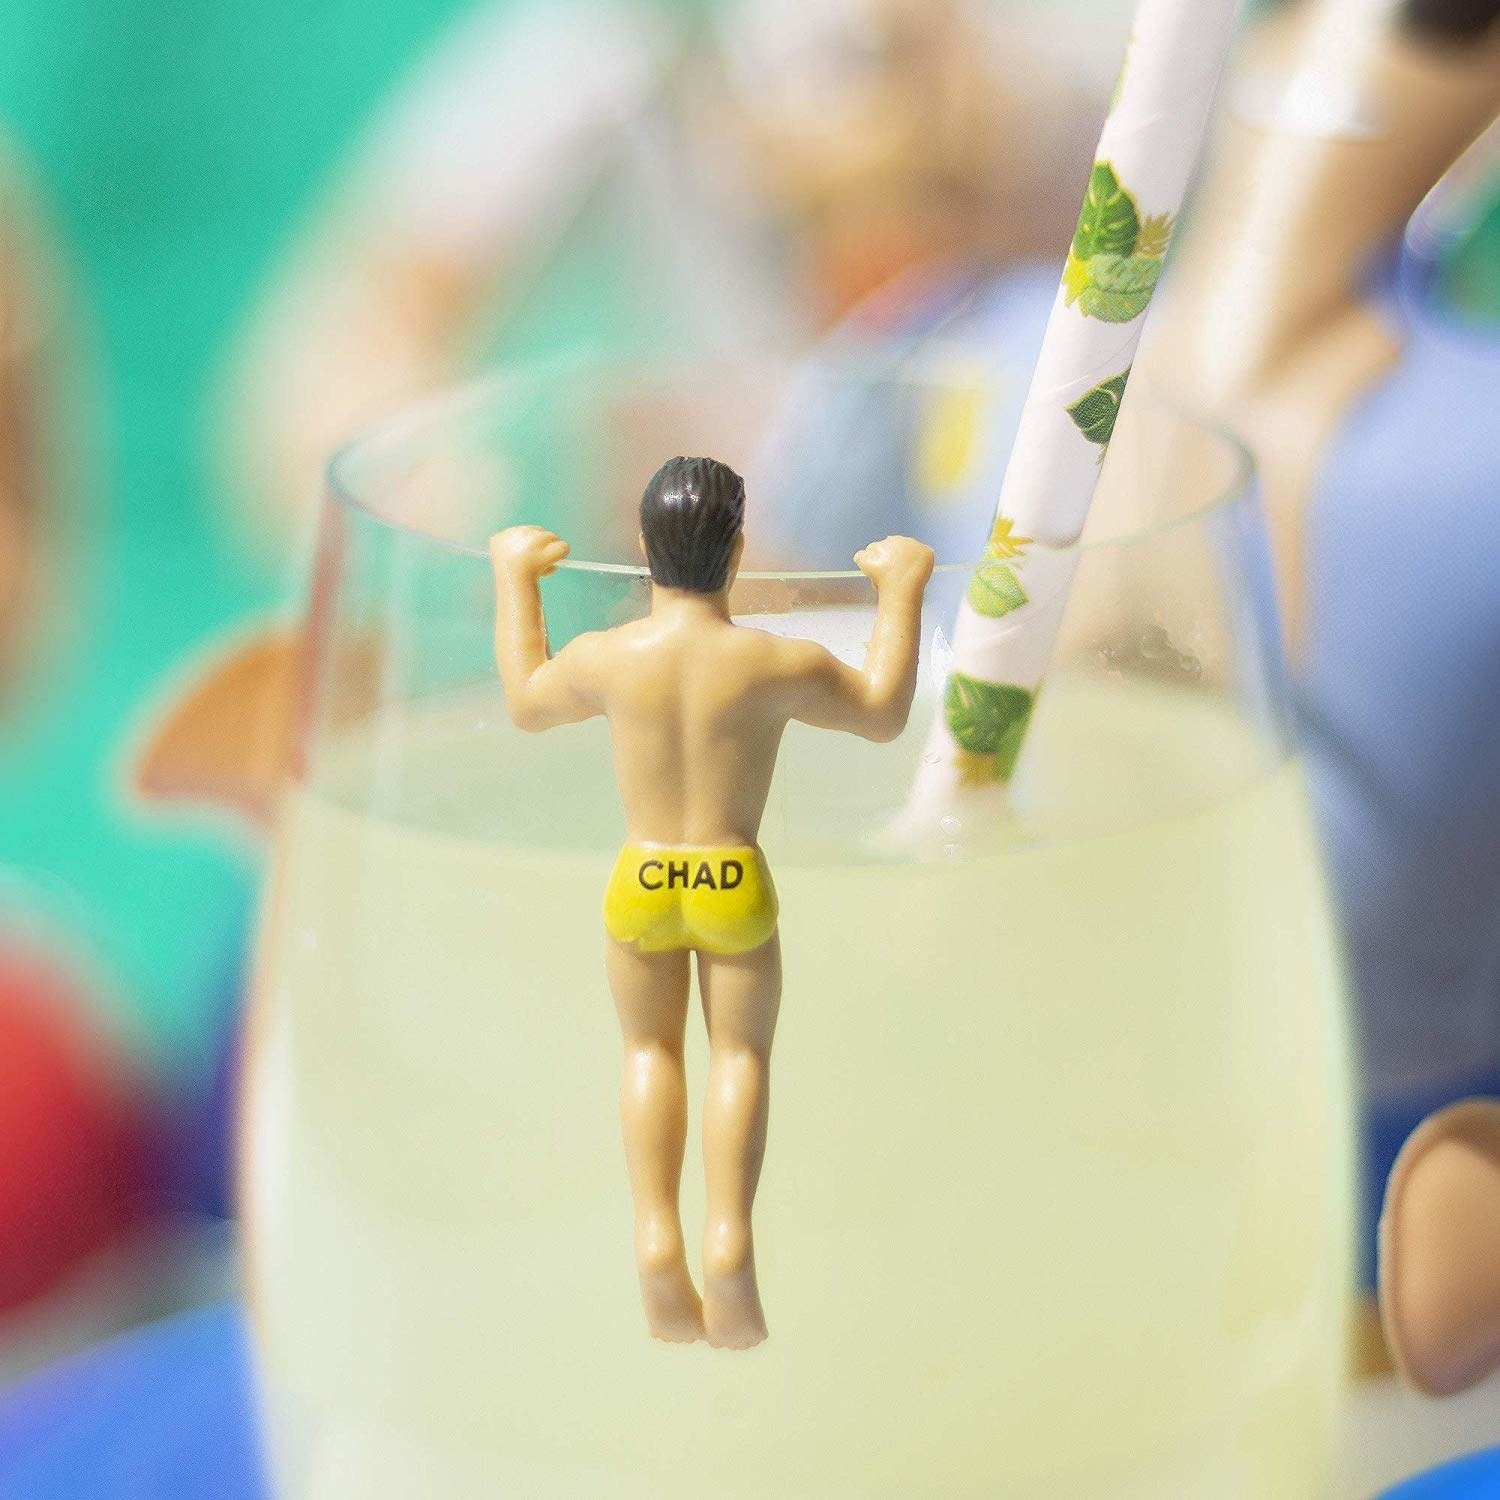 toy person with &quot;Chad&quot; on their swimsuit that hangs on the edge of a glass